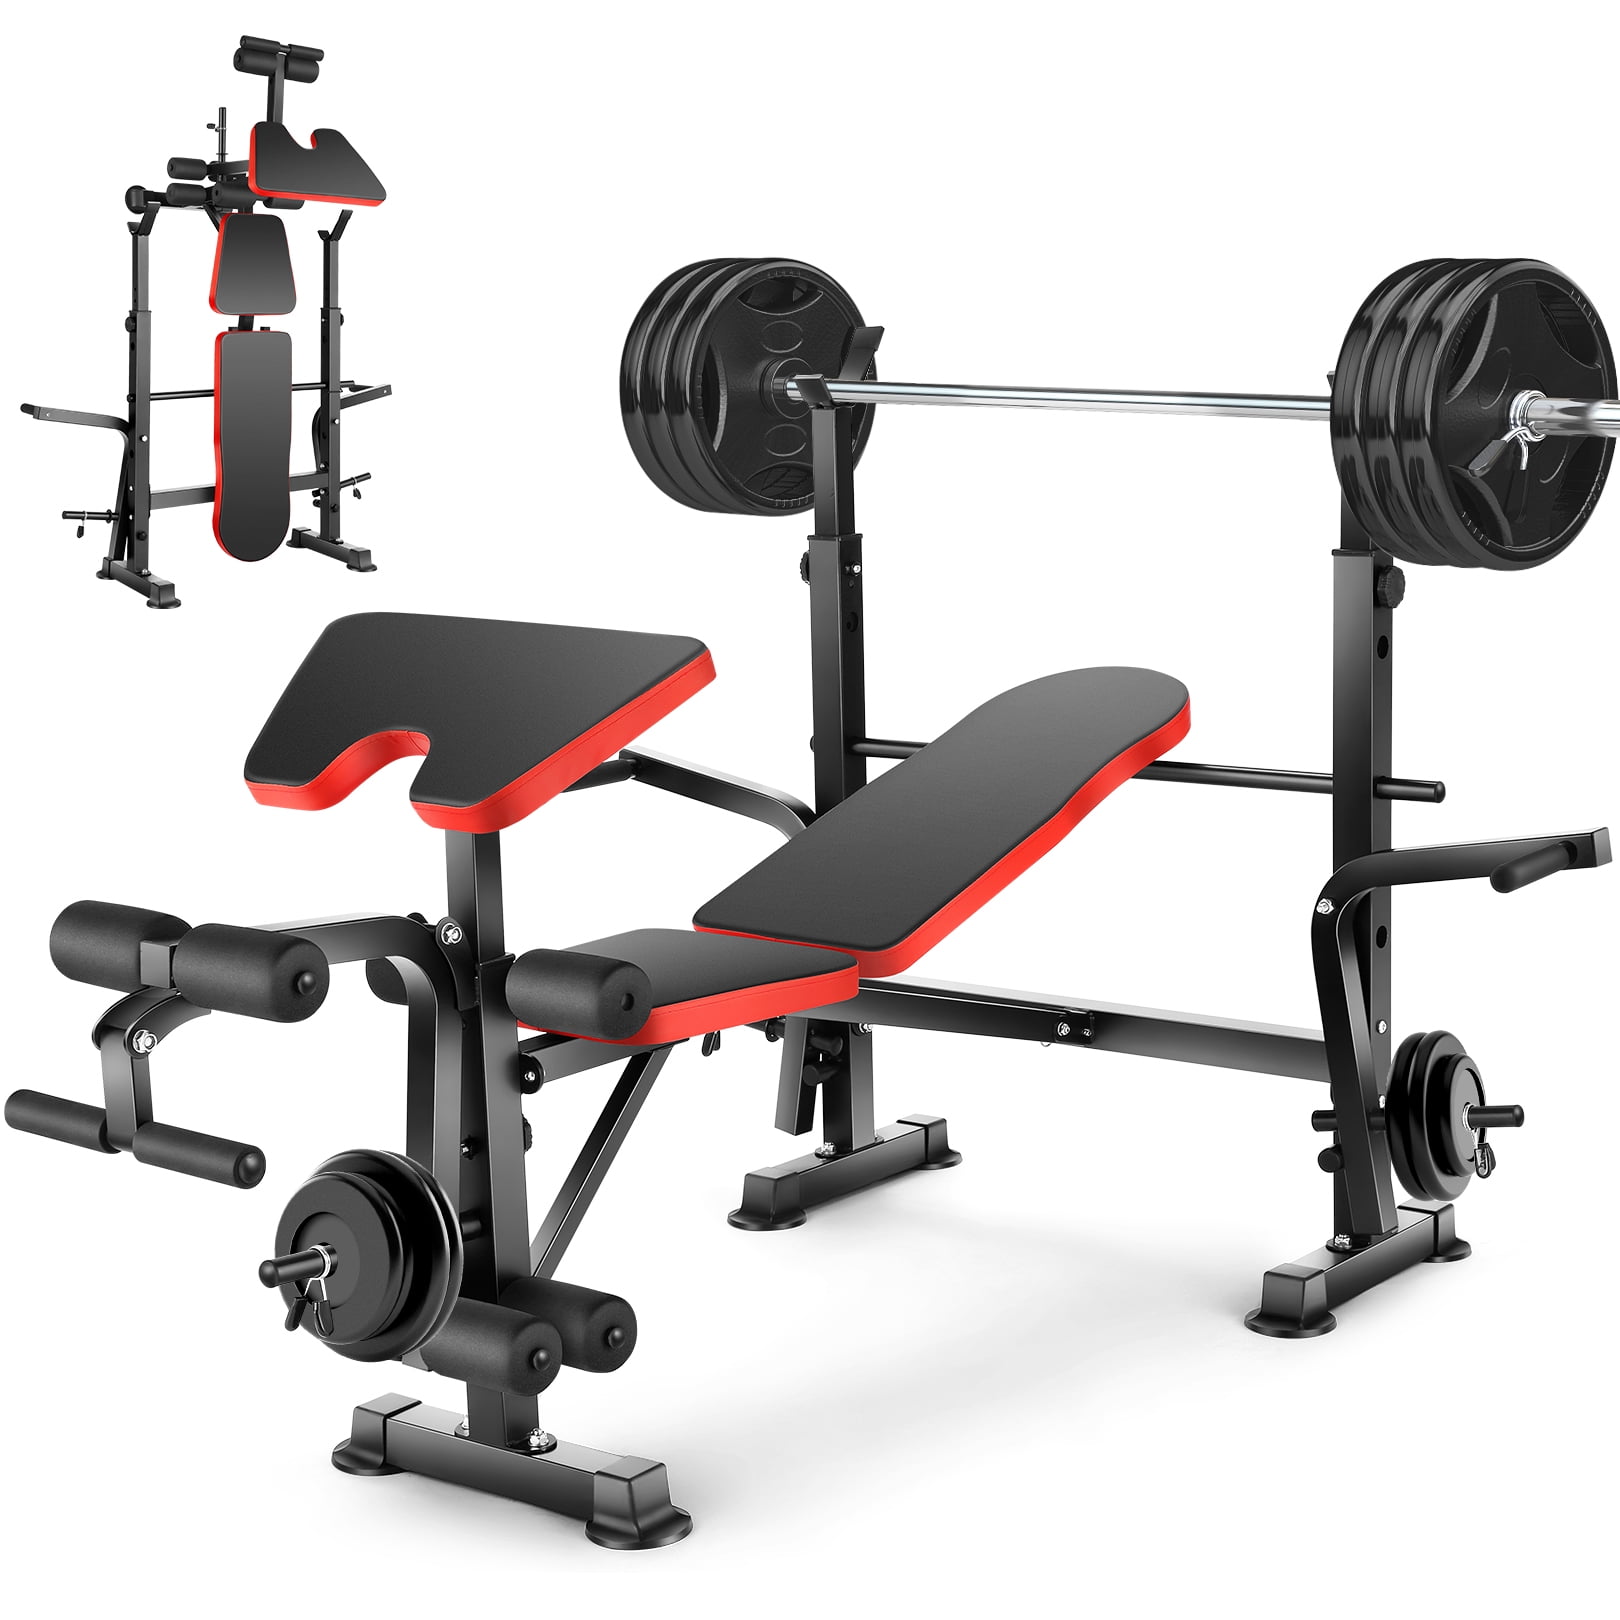 Vibespark Adjule Weight Bench